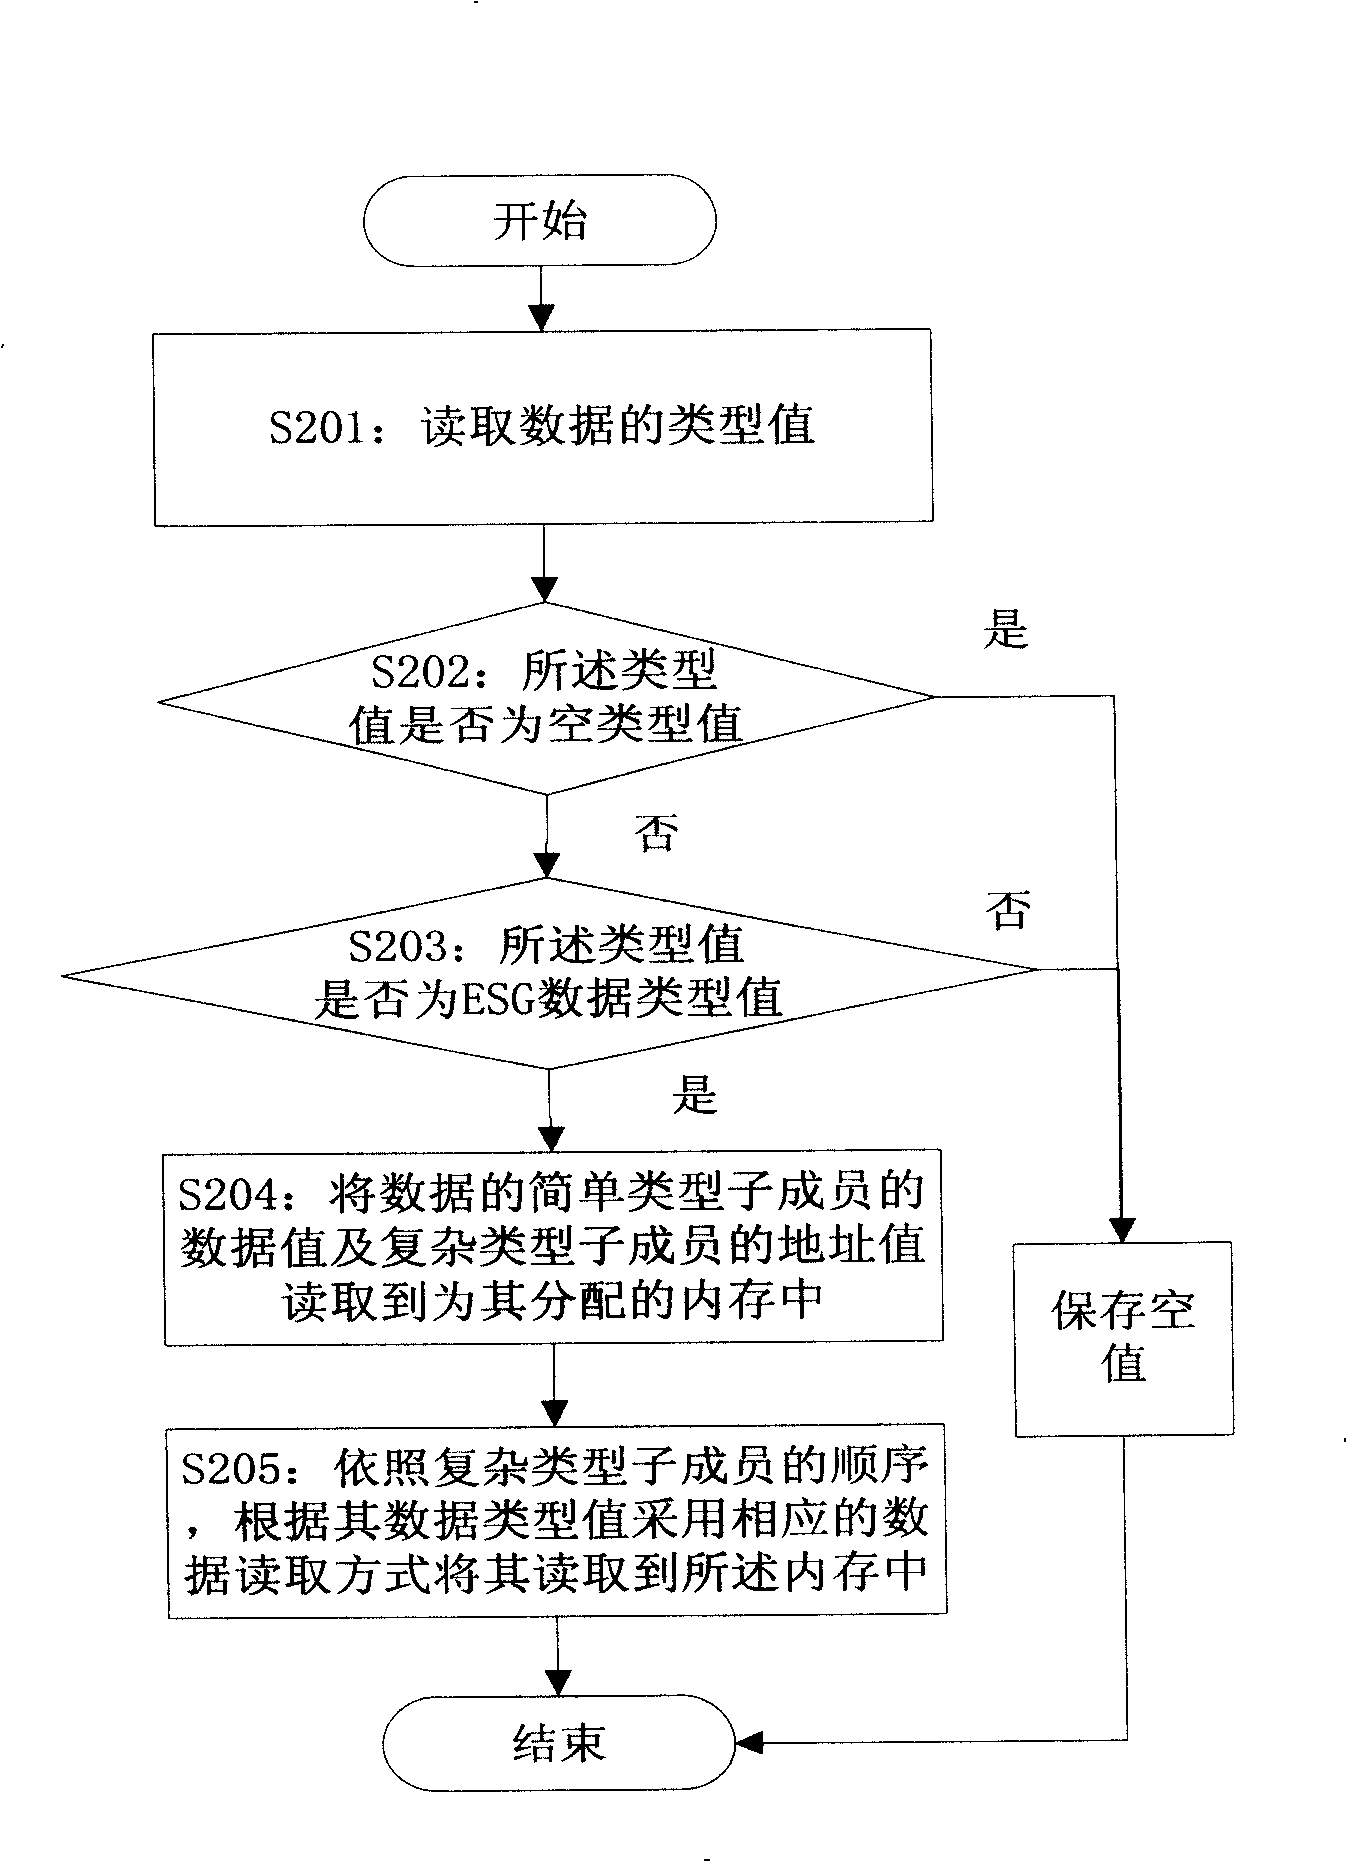 Method for serialization and inverse serialization of electric service manual data